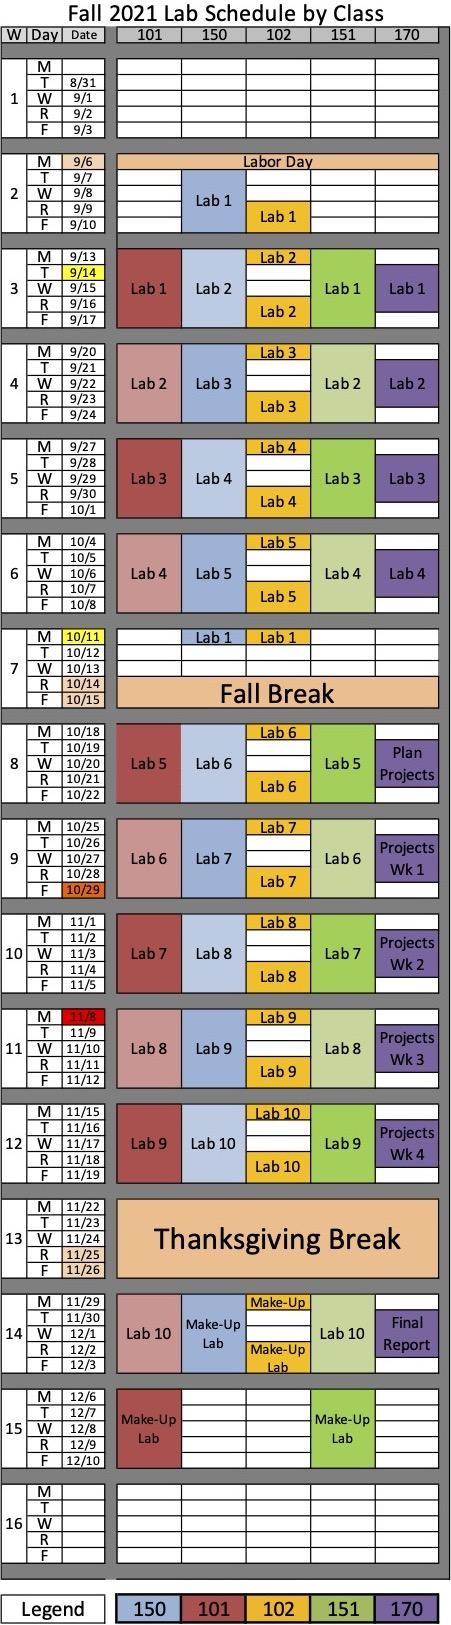 Lab Schedule | Department of Physics and Astronomy